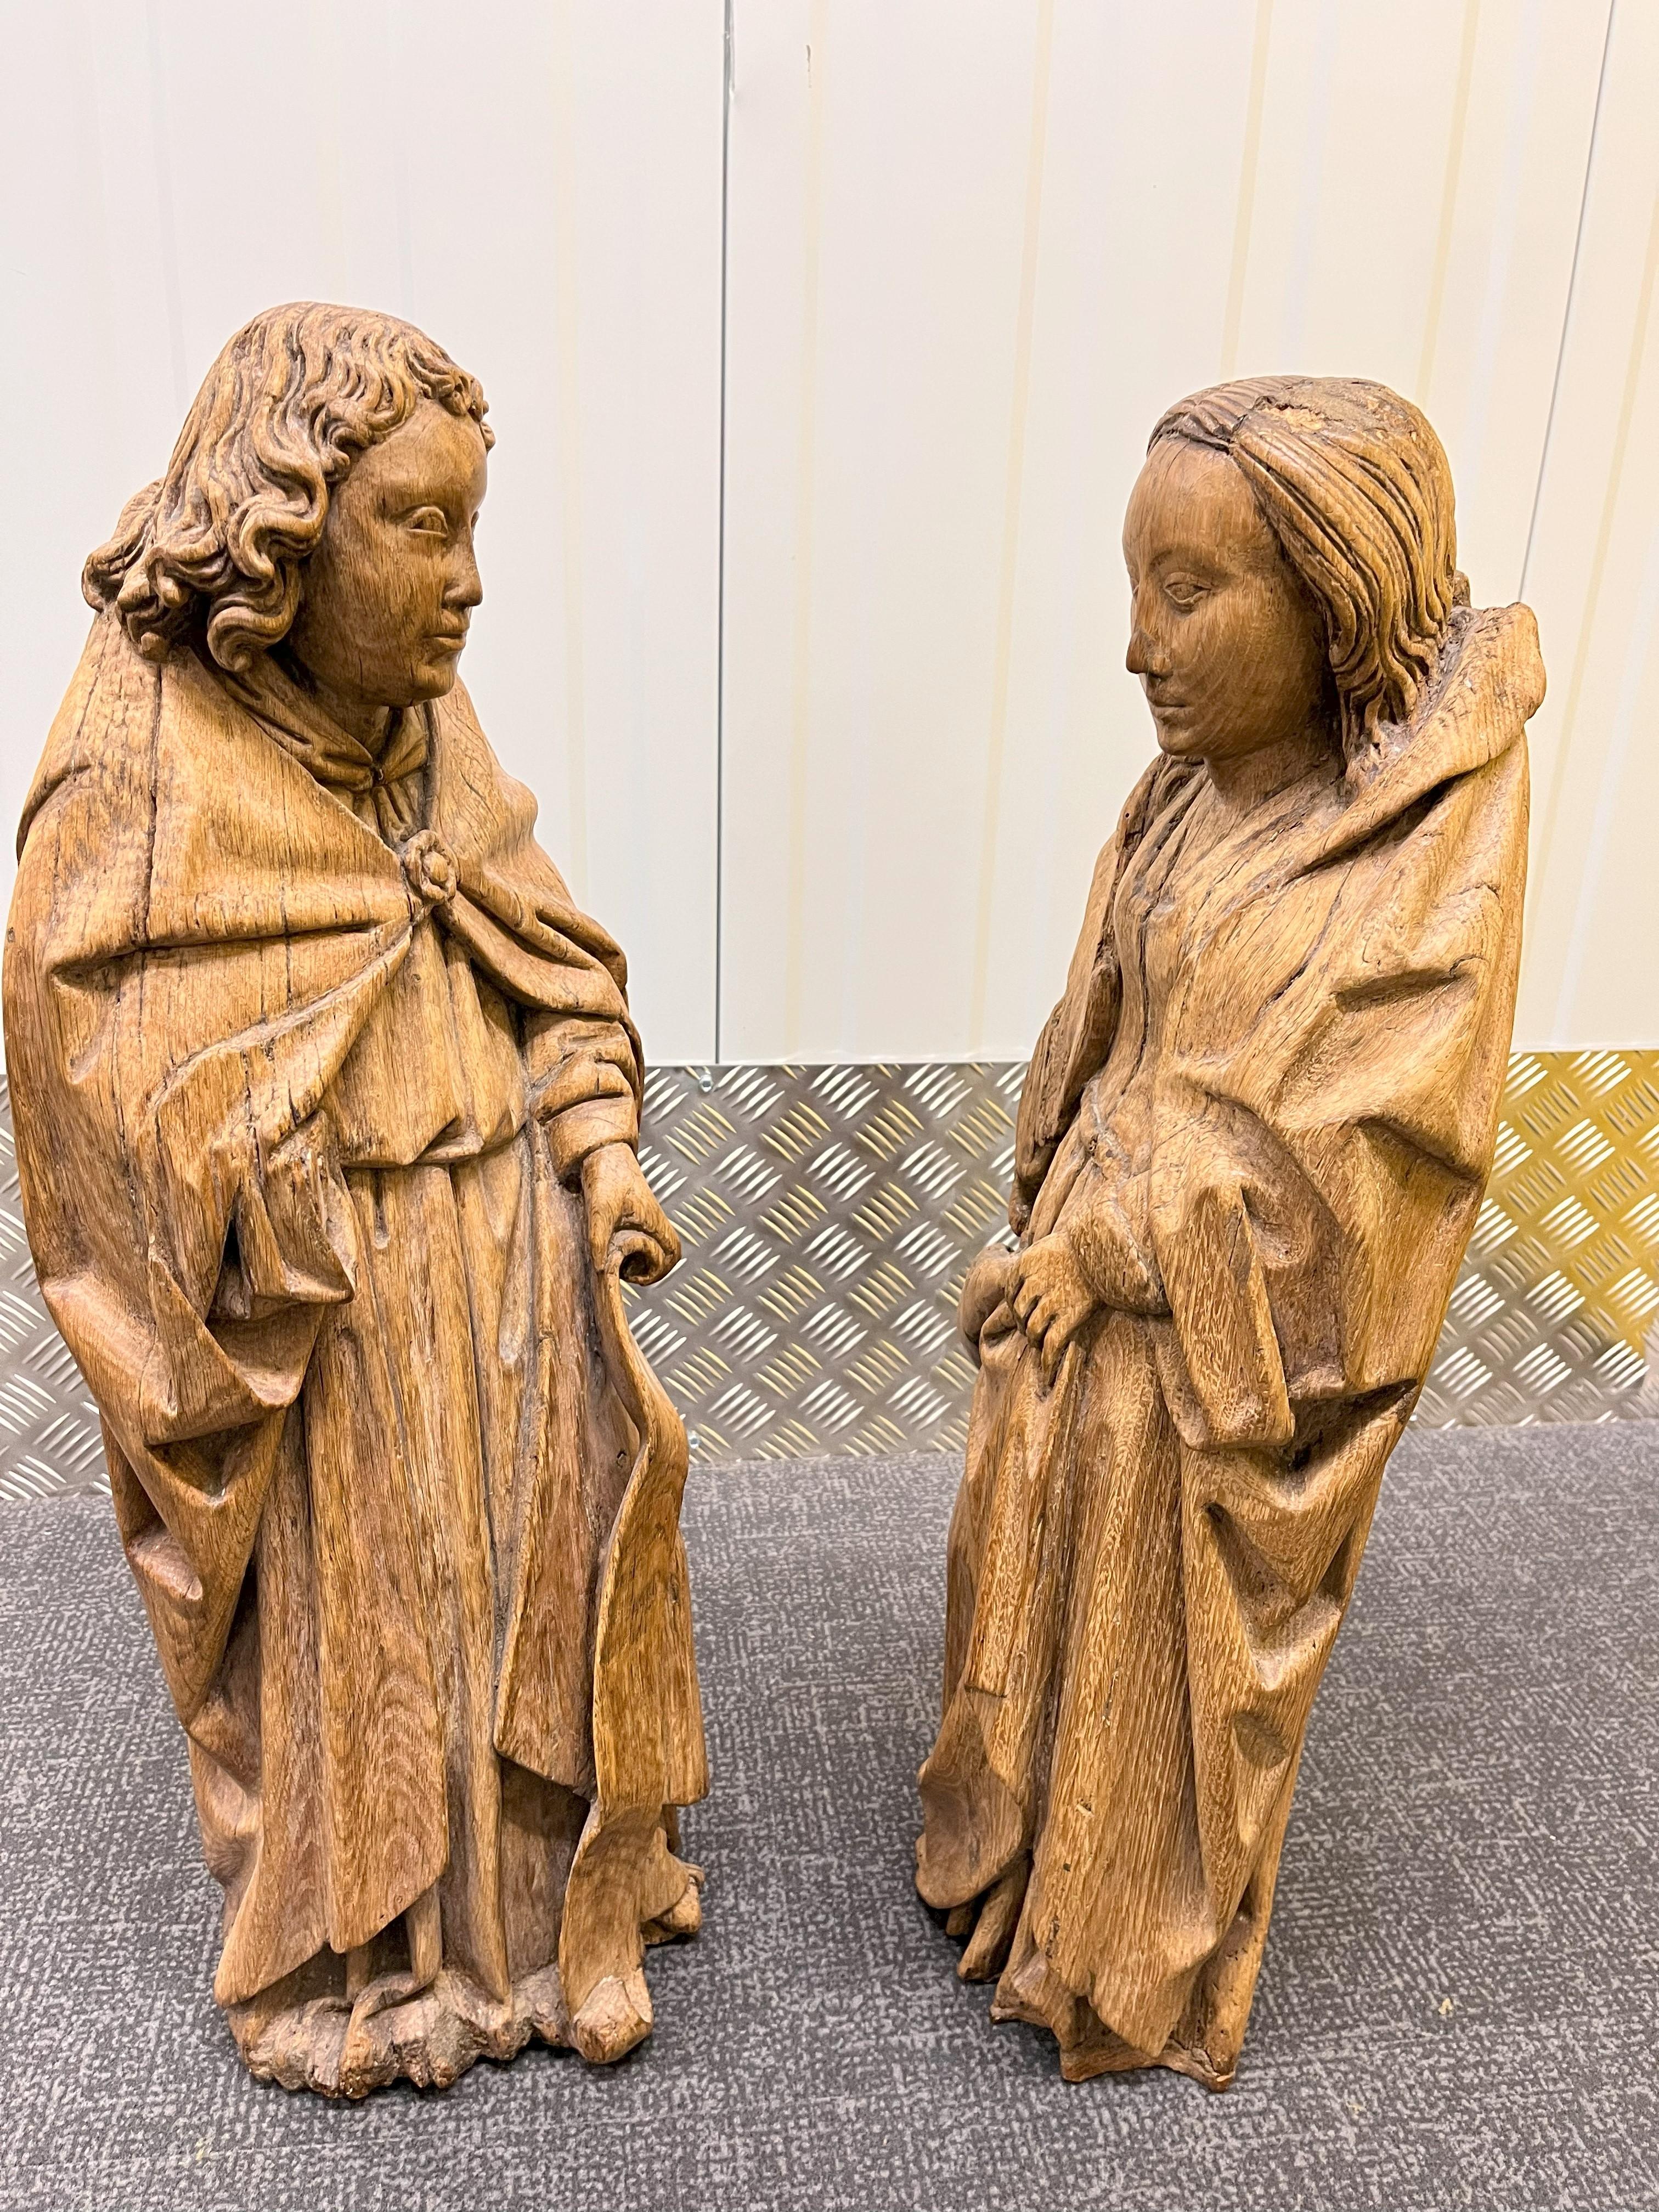 A Pair of 16th Century Oak Saints: One being a male depicted wearing a long hooded cloak held together with a brooch over a flowing tunic tied at the waist and holding a banner in one hand, 28 inches (71 cm) in height, 10 inches wide. The other a